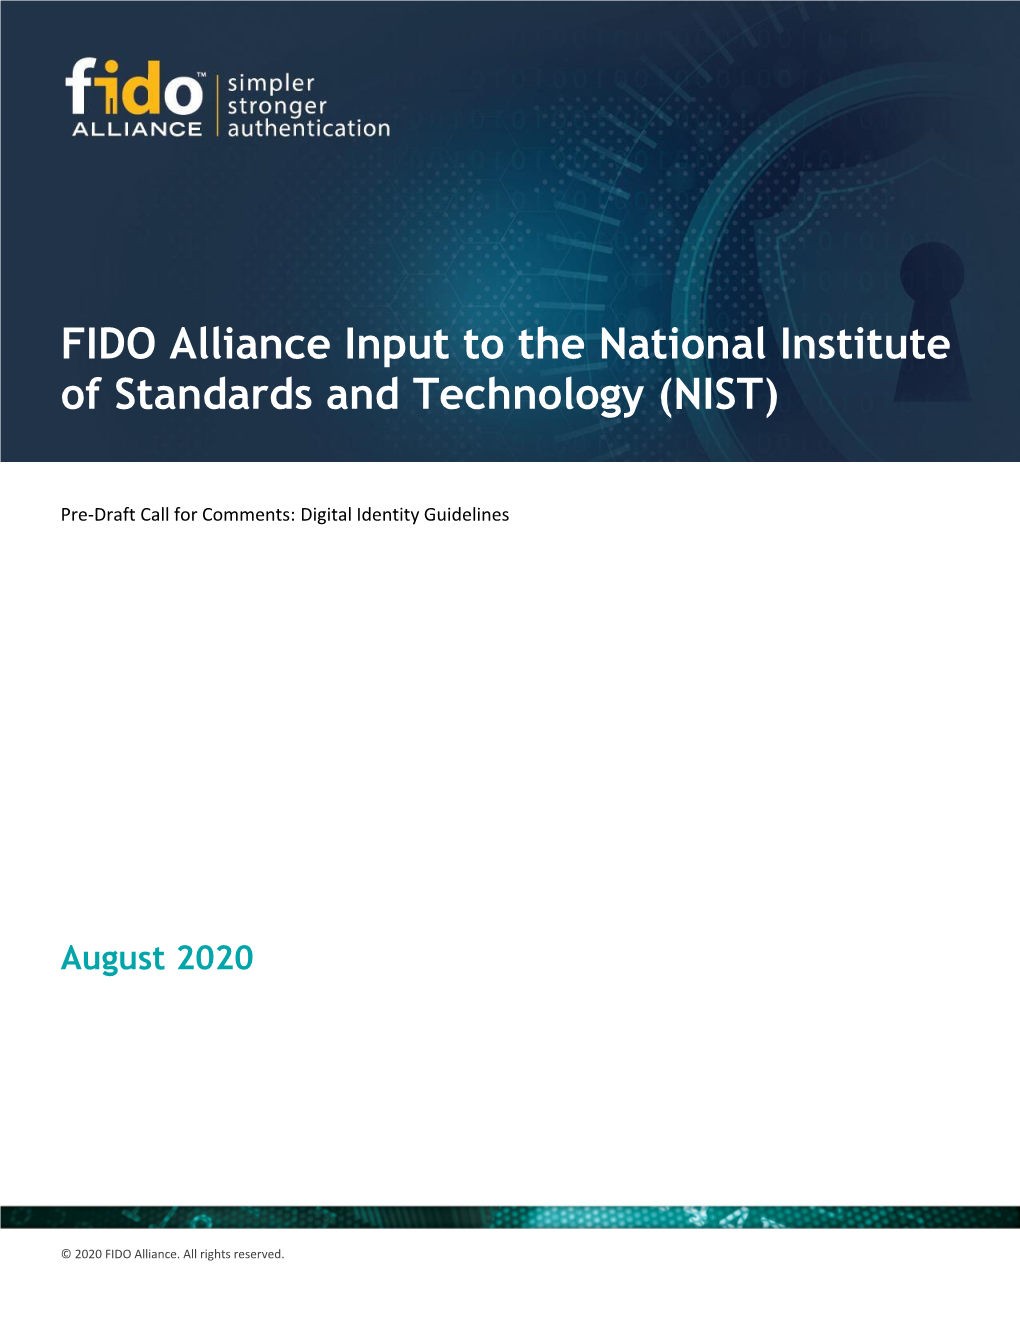 Comments on 800-63 RFC from Fido Alliance